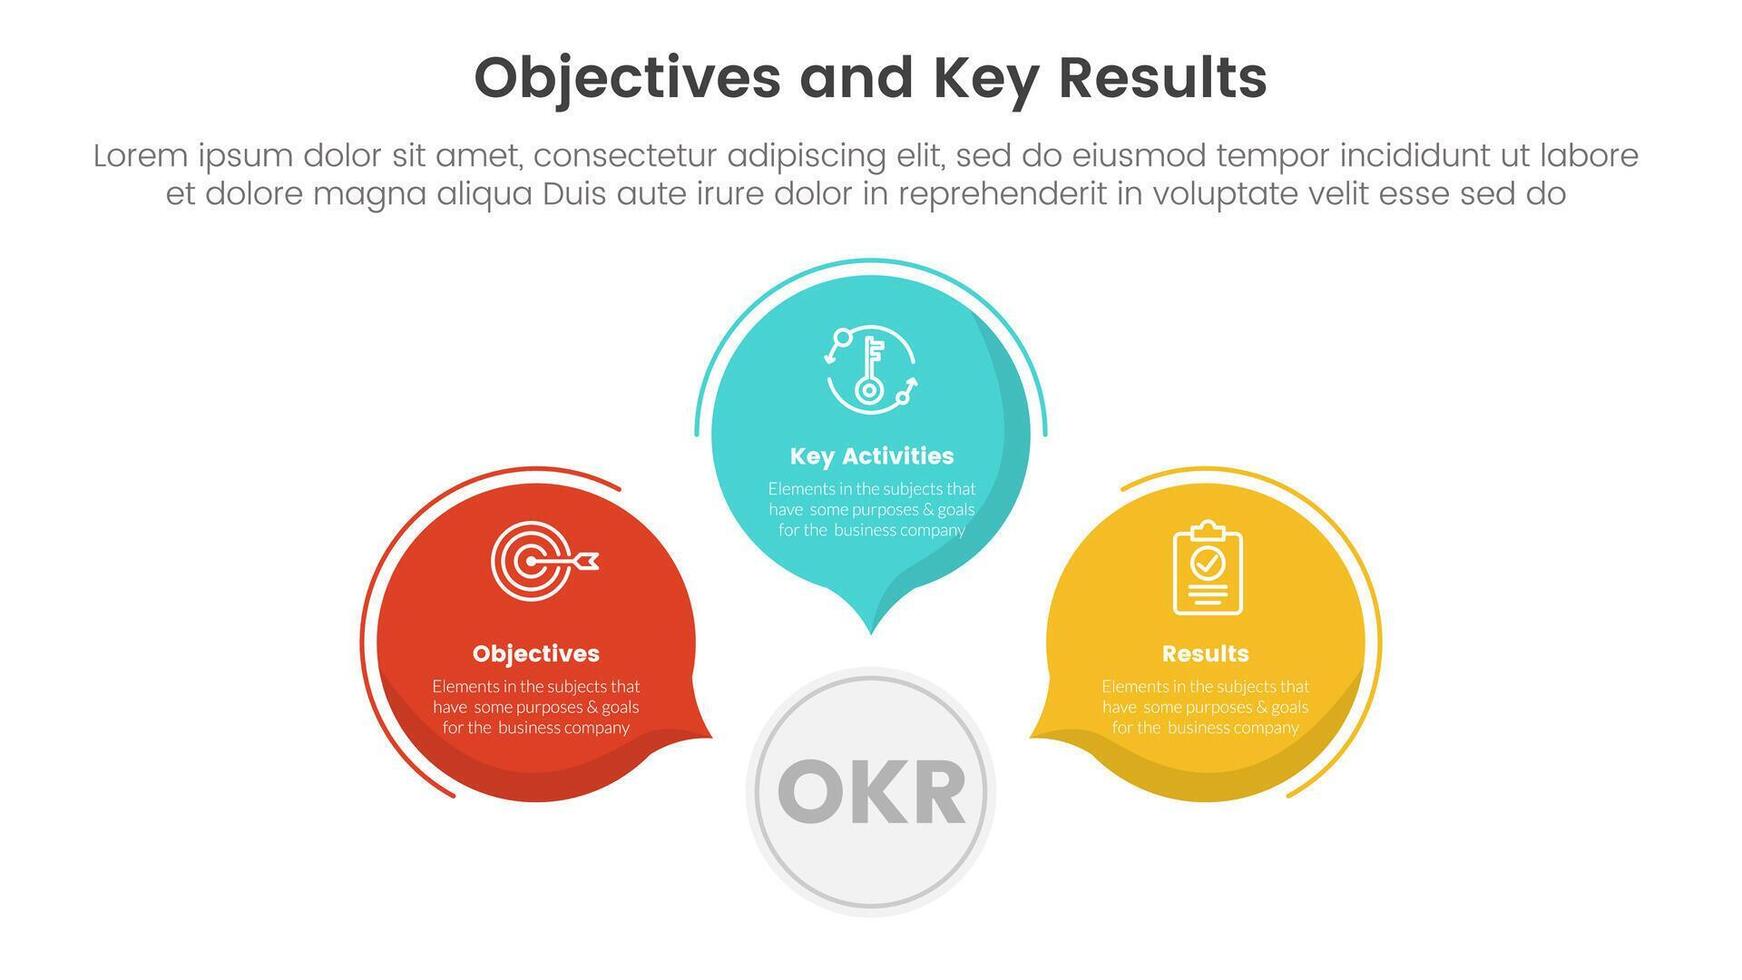 okr objectives and key results infographic 3 point stage template with circle callout comment shape concept for slide presentation vector